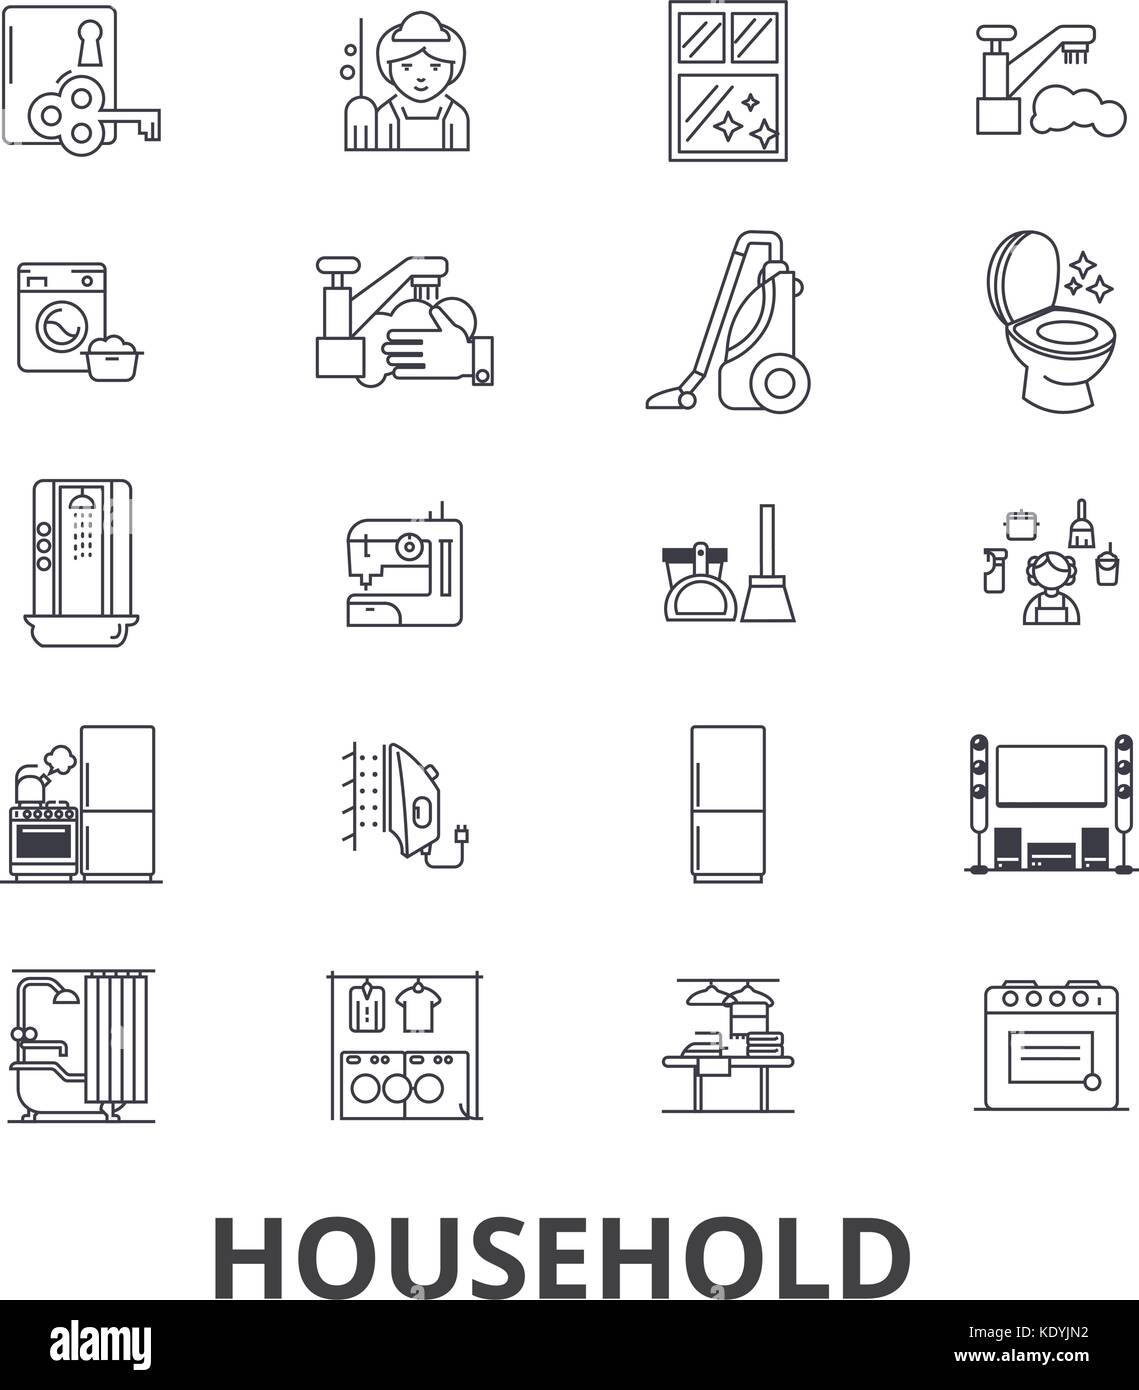 Household, equipment, cleaning, home, house, machine, appliances line icons. Editable strokes. Flat design vector illustration symbol concept. Linear isolated signs Stock Vector